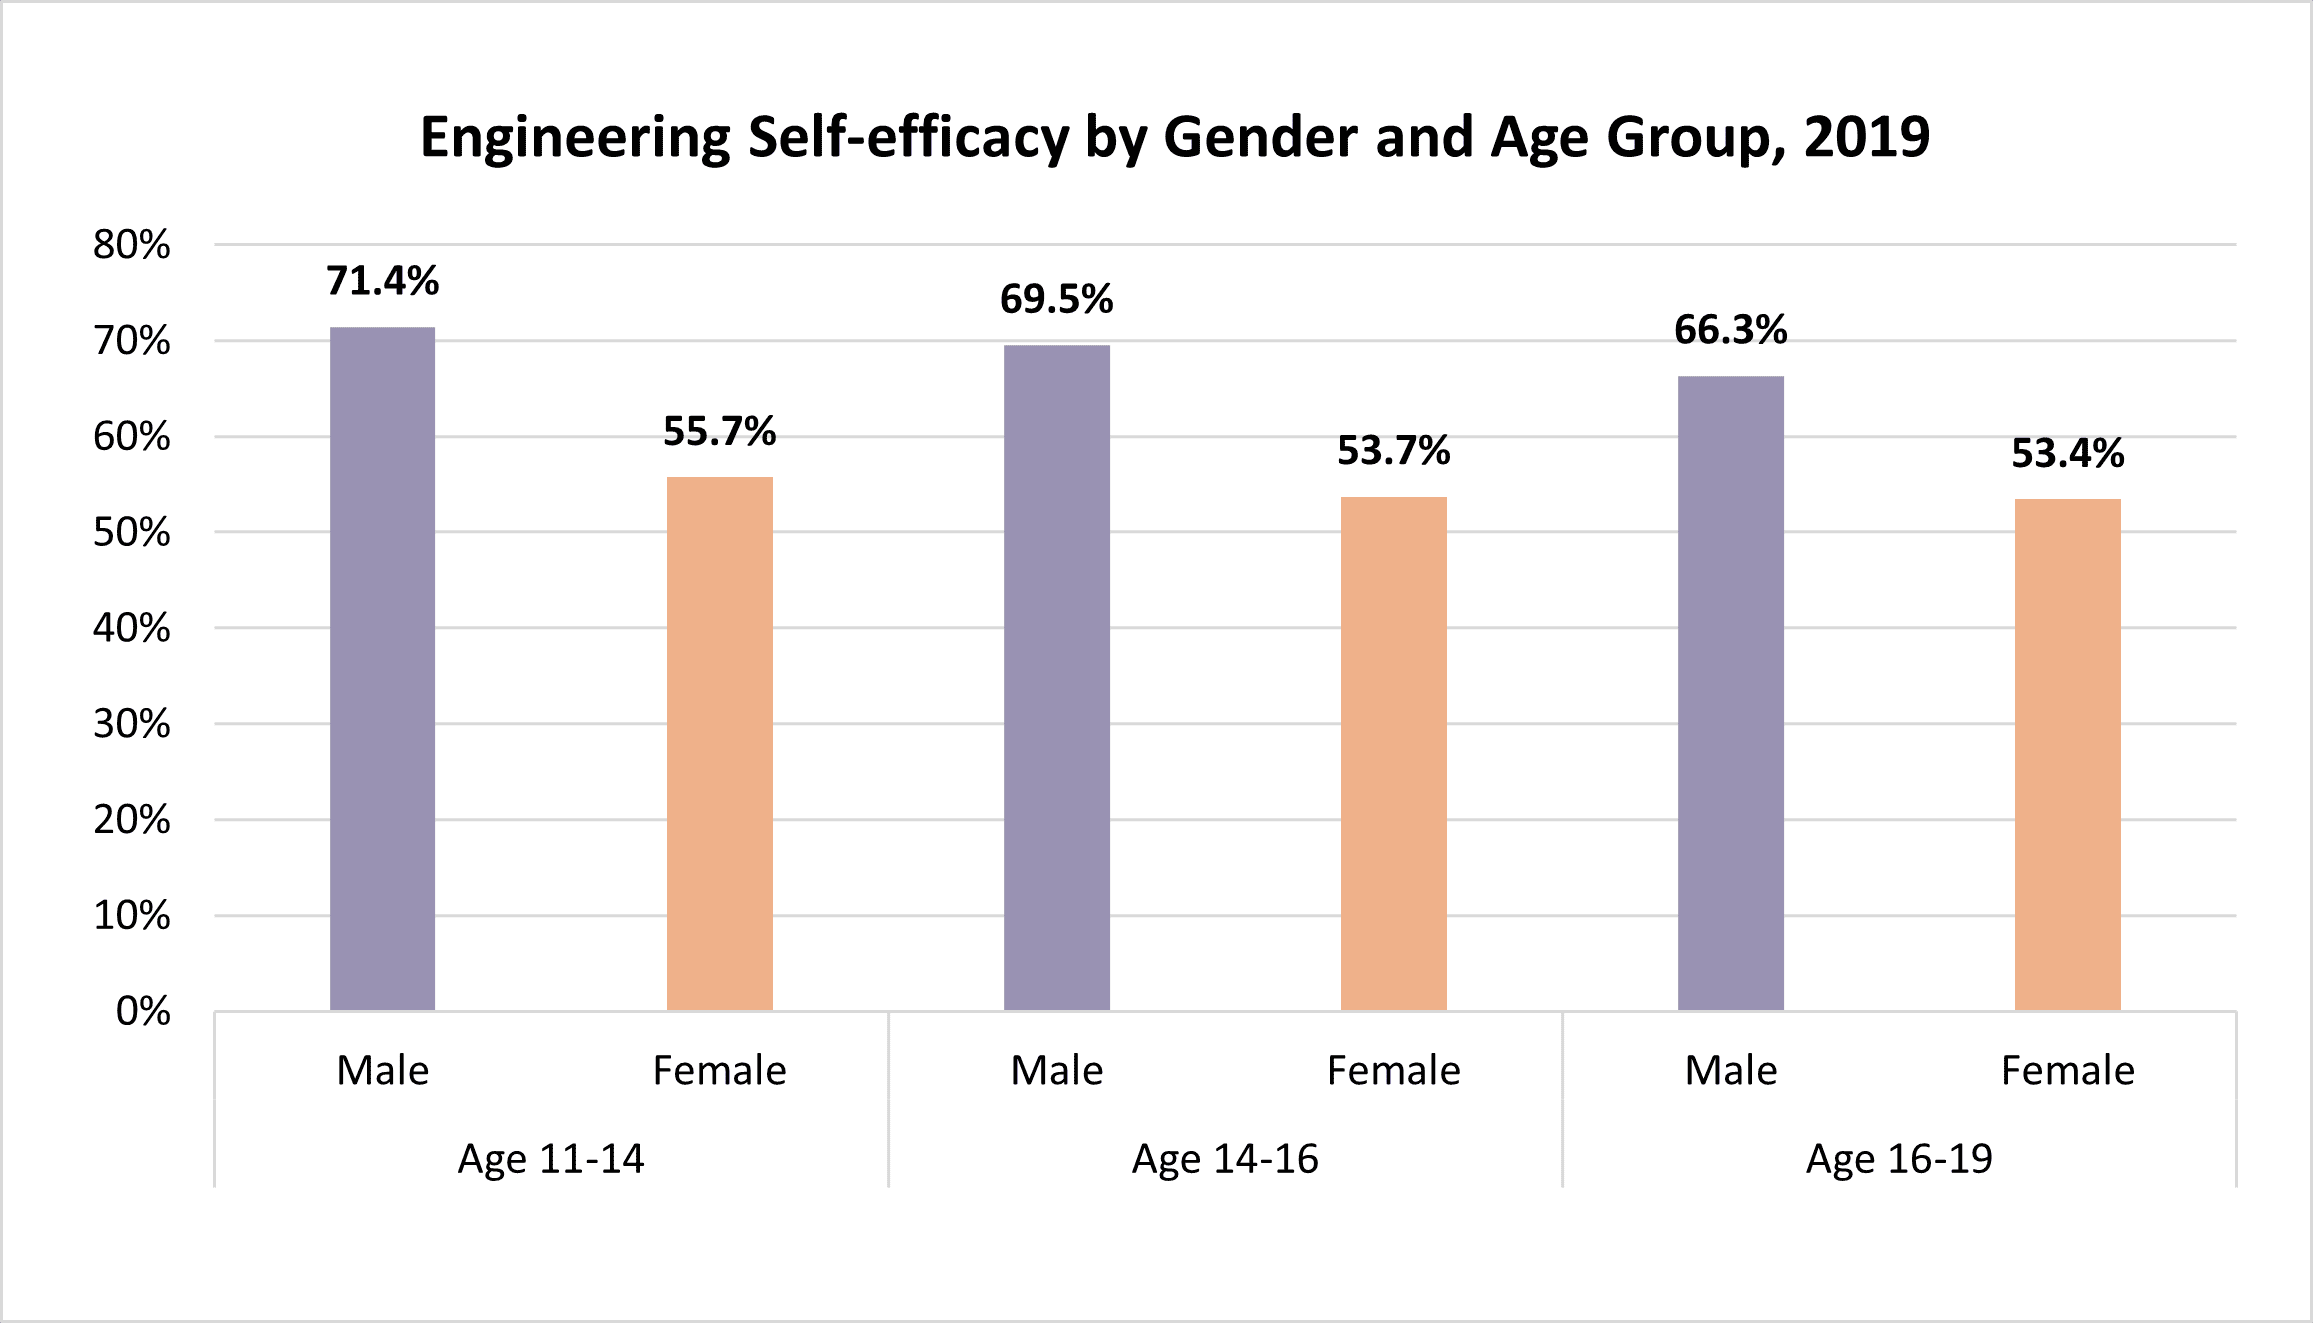 Engineering Self-efficacy by Gender and Age Group, 2019